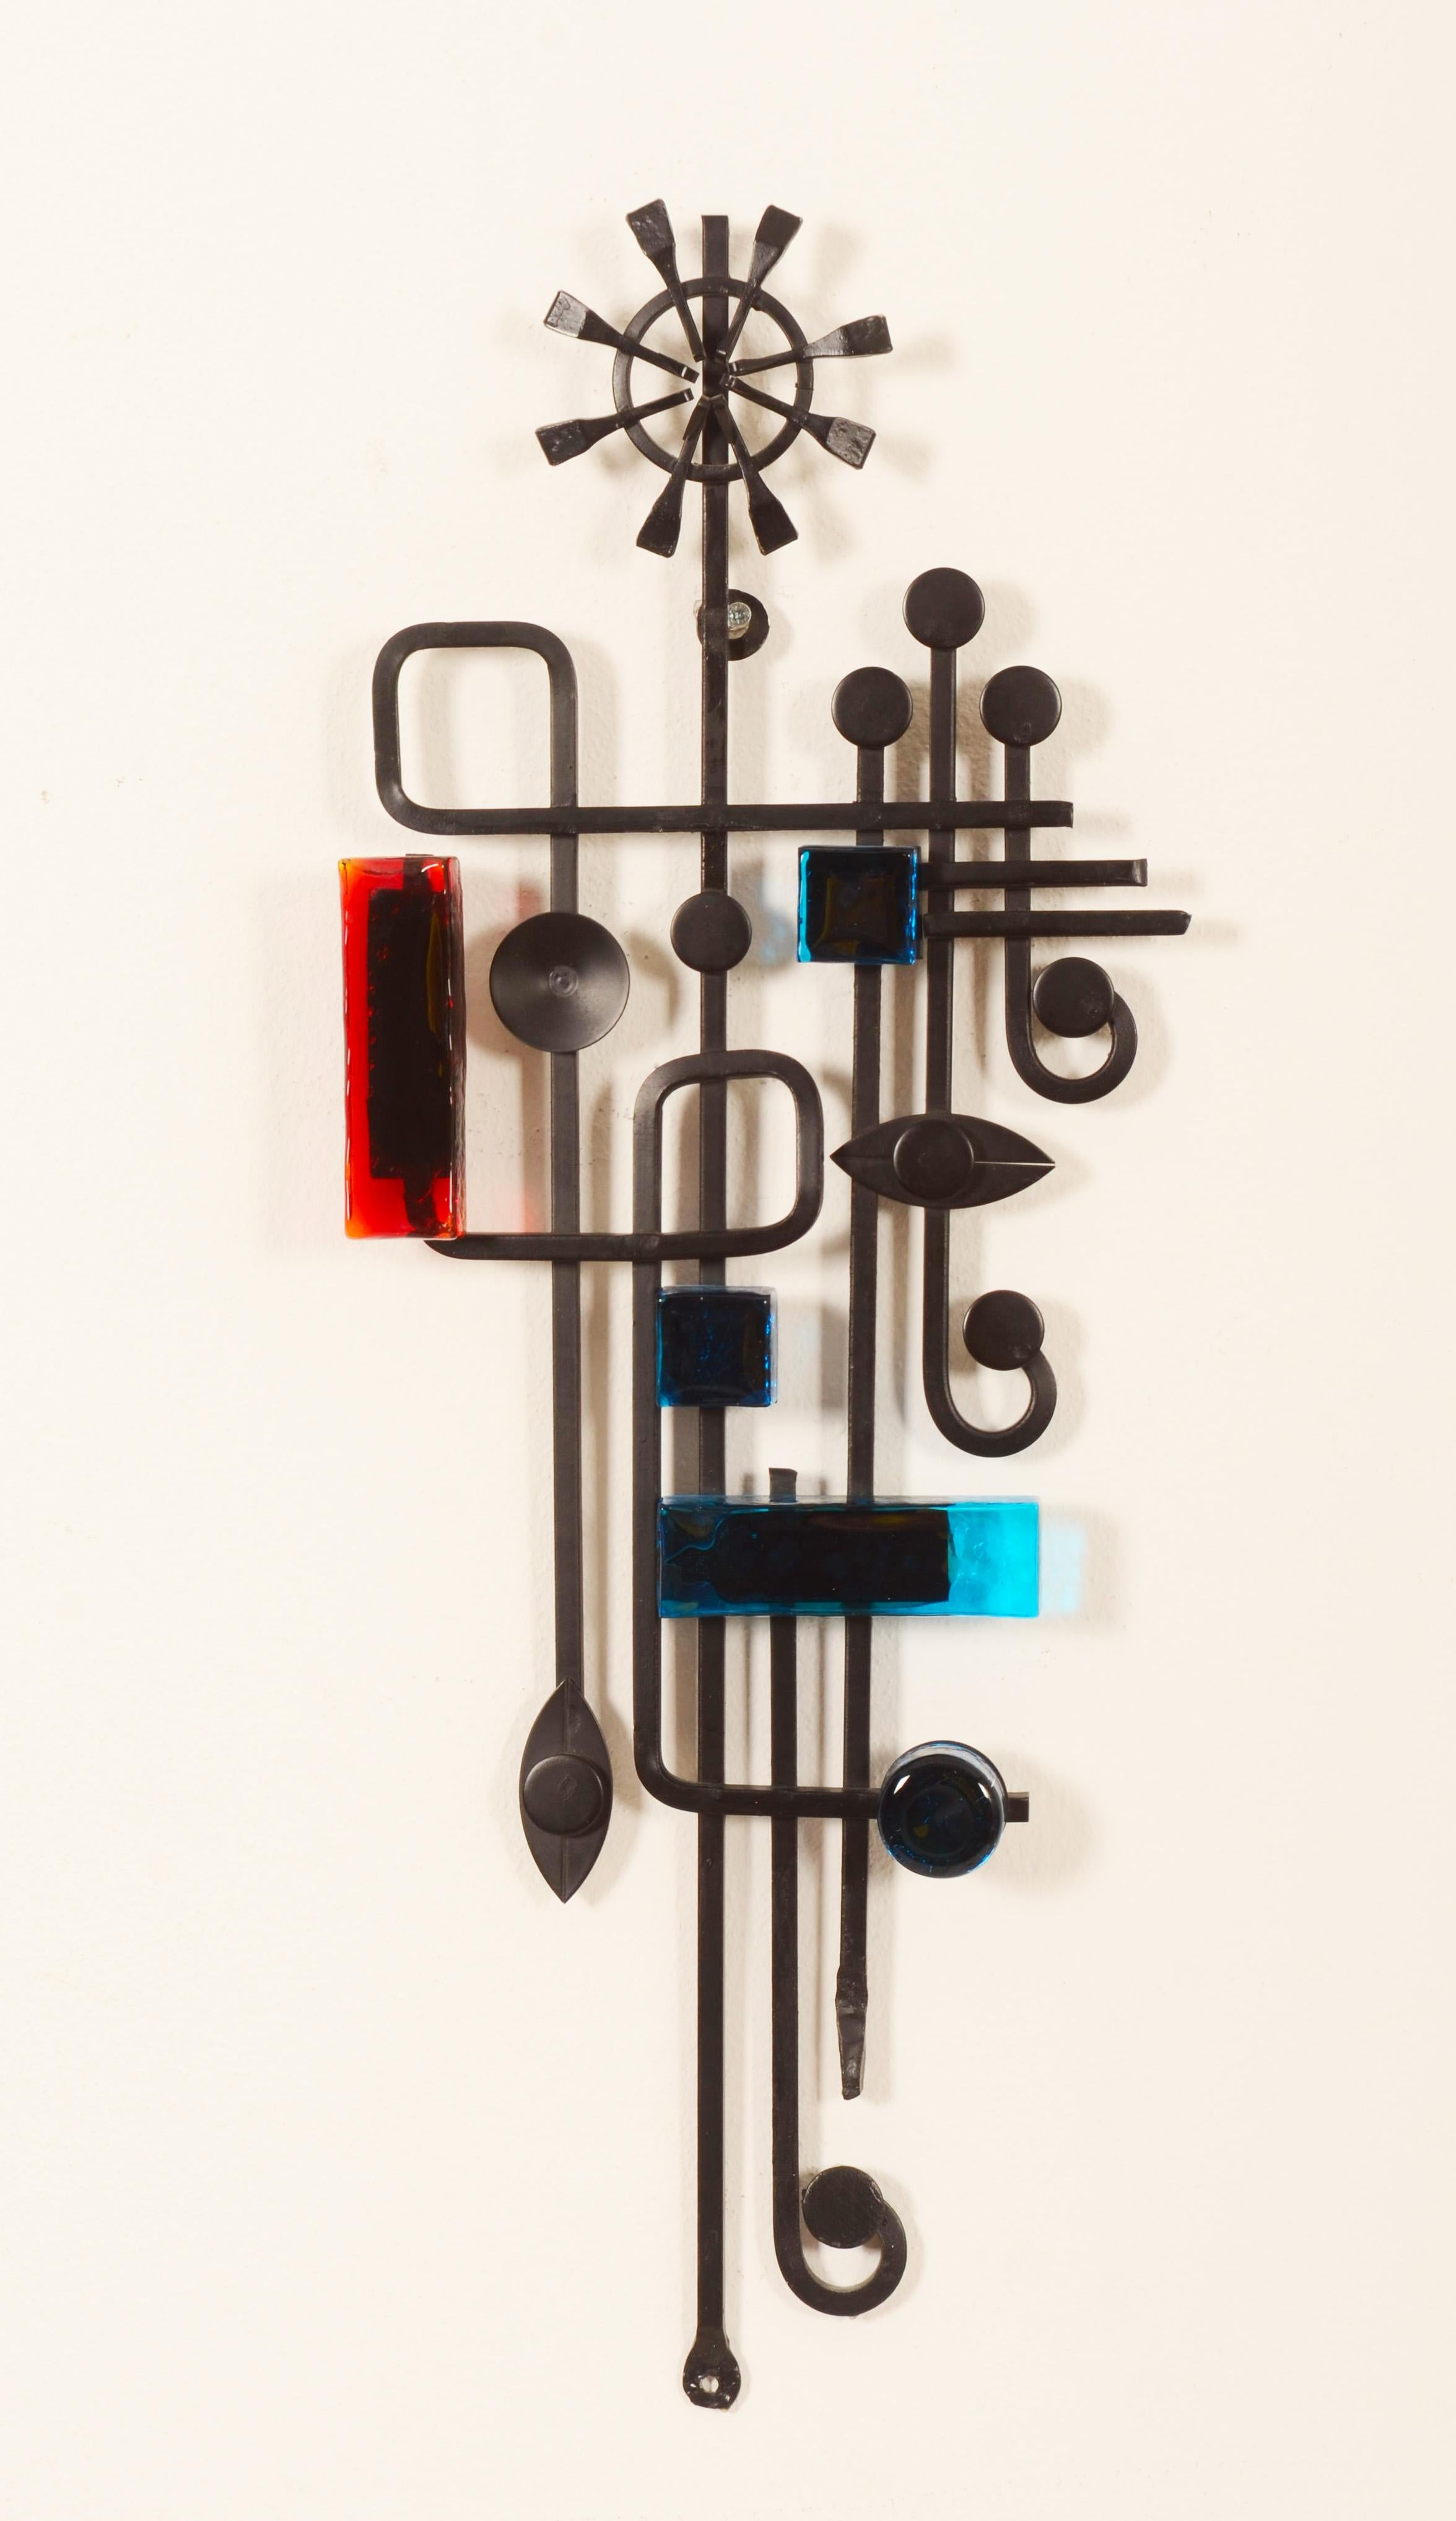 Ebonised metal abstract art work with blue and red glass elements. Created in the 1960s by Svend Aage Holm Sorensen.